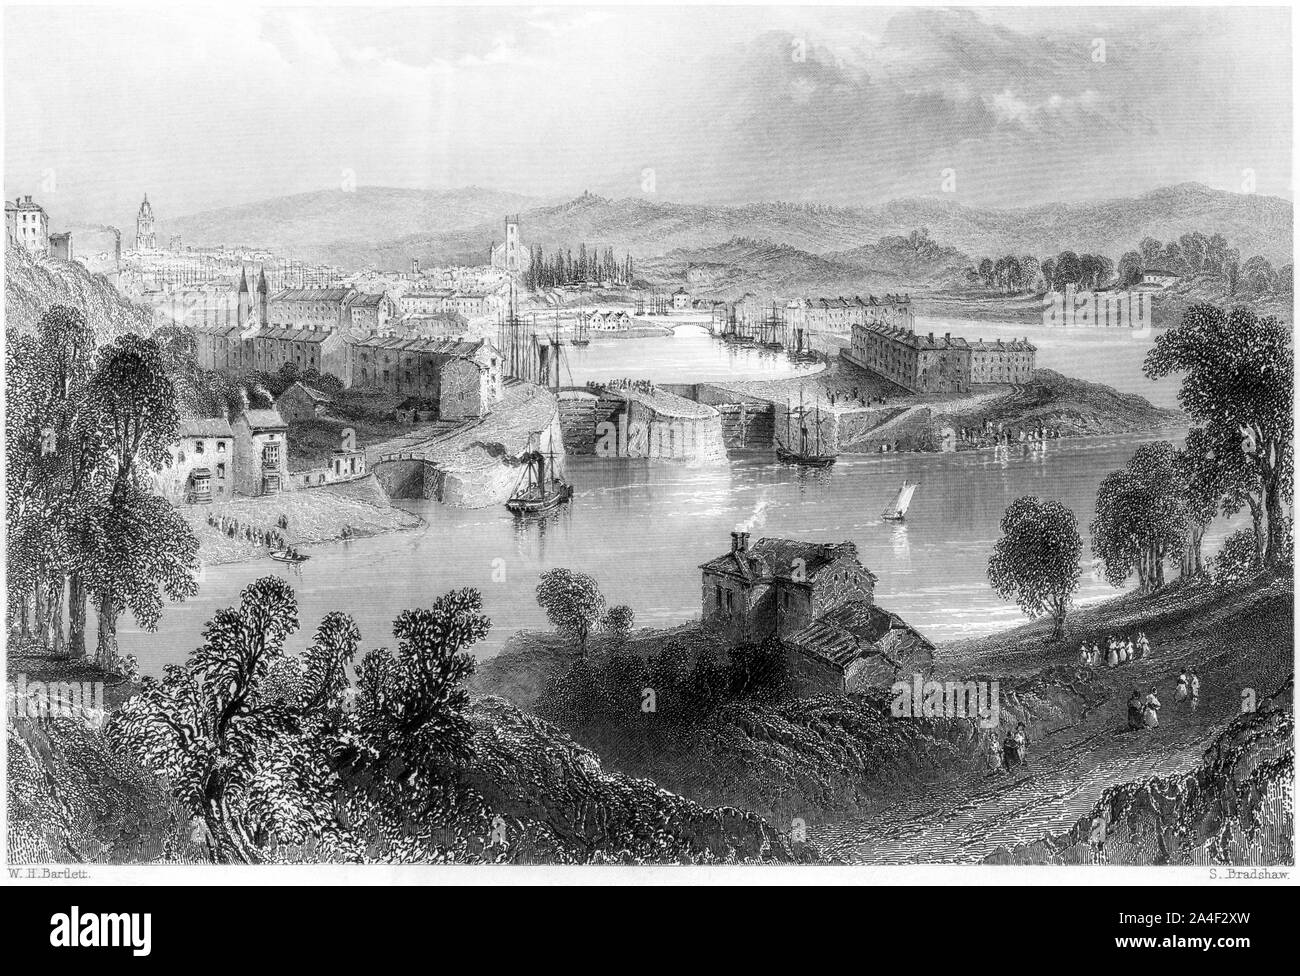 An engraving of Bristol from Rownham Ferry scanned at high resolution from a book printed in 1842.  Believed copyright free. Stock Photo